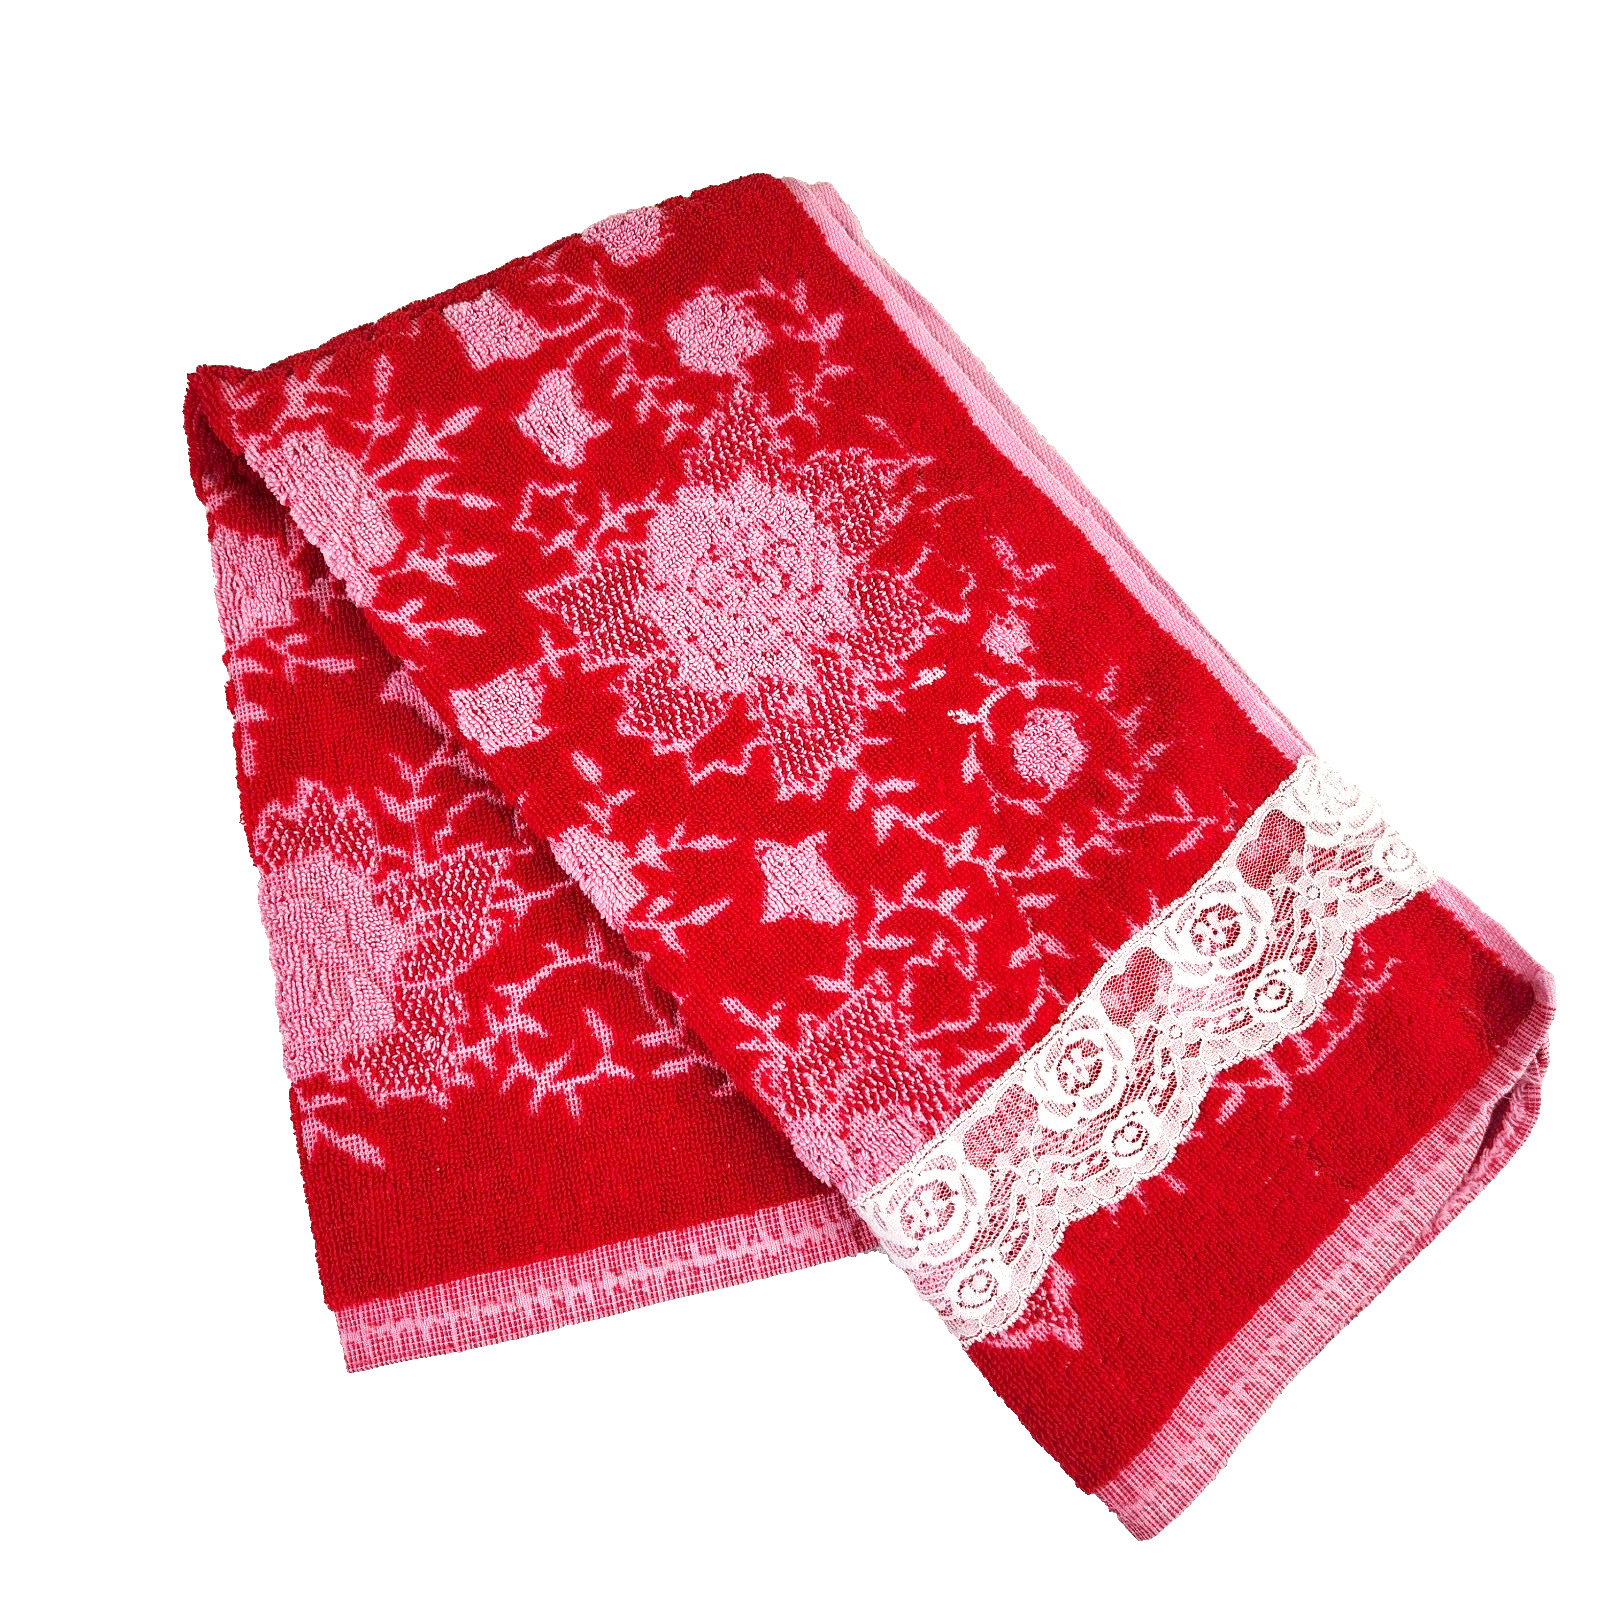 Vintage 60s 70s Mid Century Red Pink Sculpted Floral Pattern Hand Towel Lace